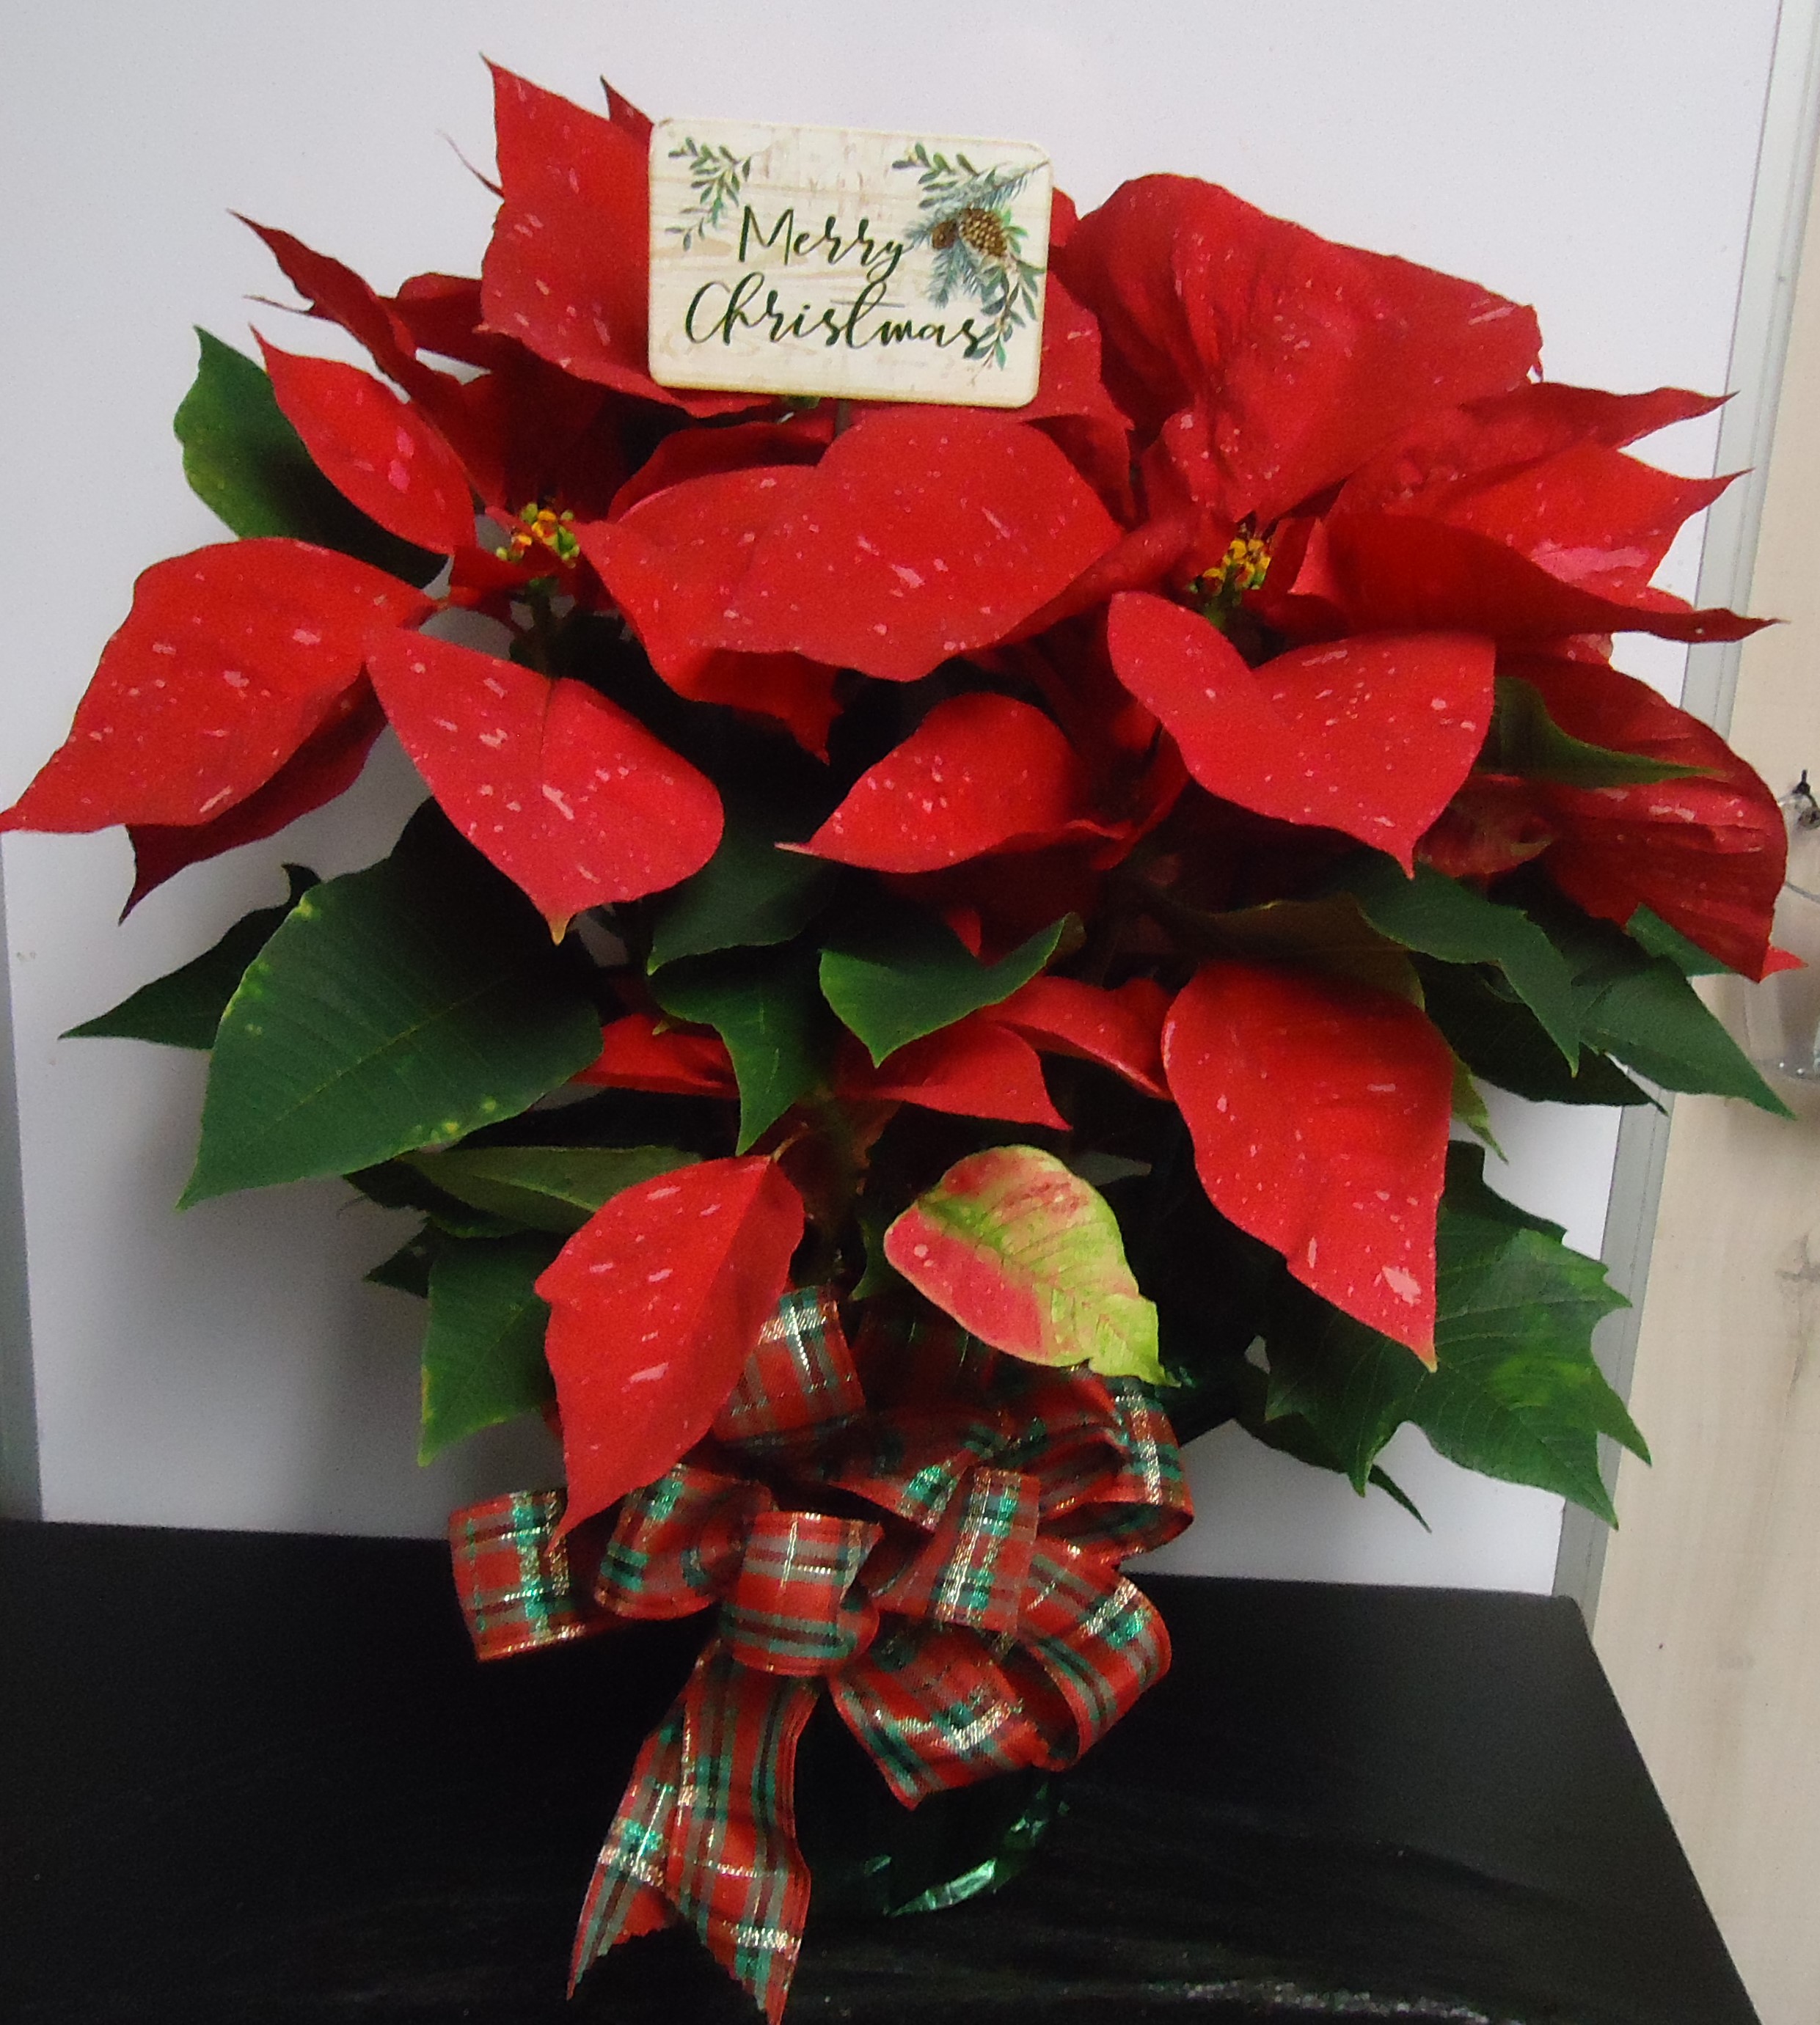 (4B) "Jingle Bell" Poinsettia
(Red & Pink) 
W/ Merry Christmas Pick
$40.00